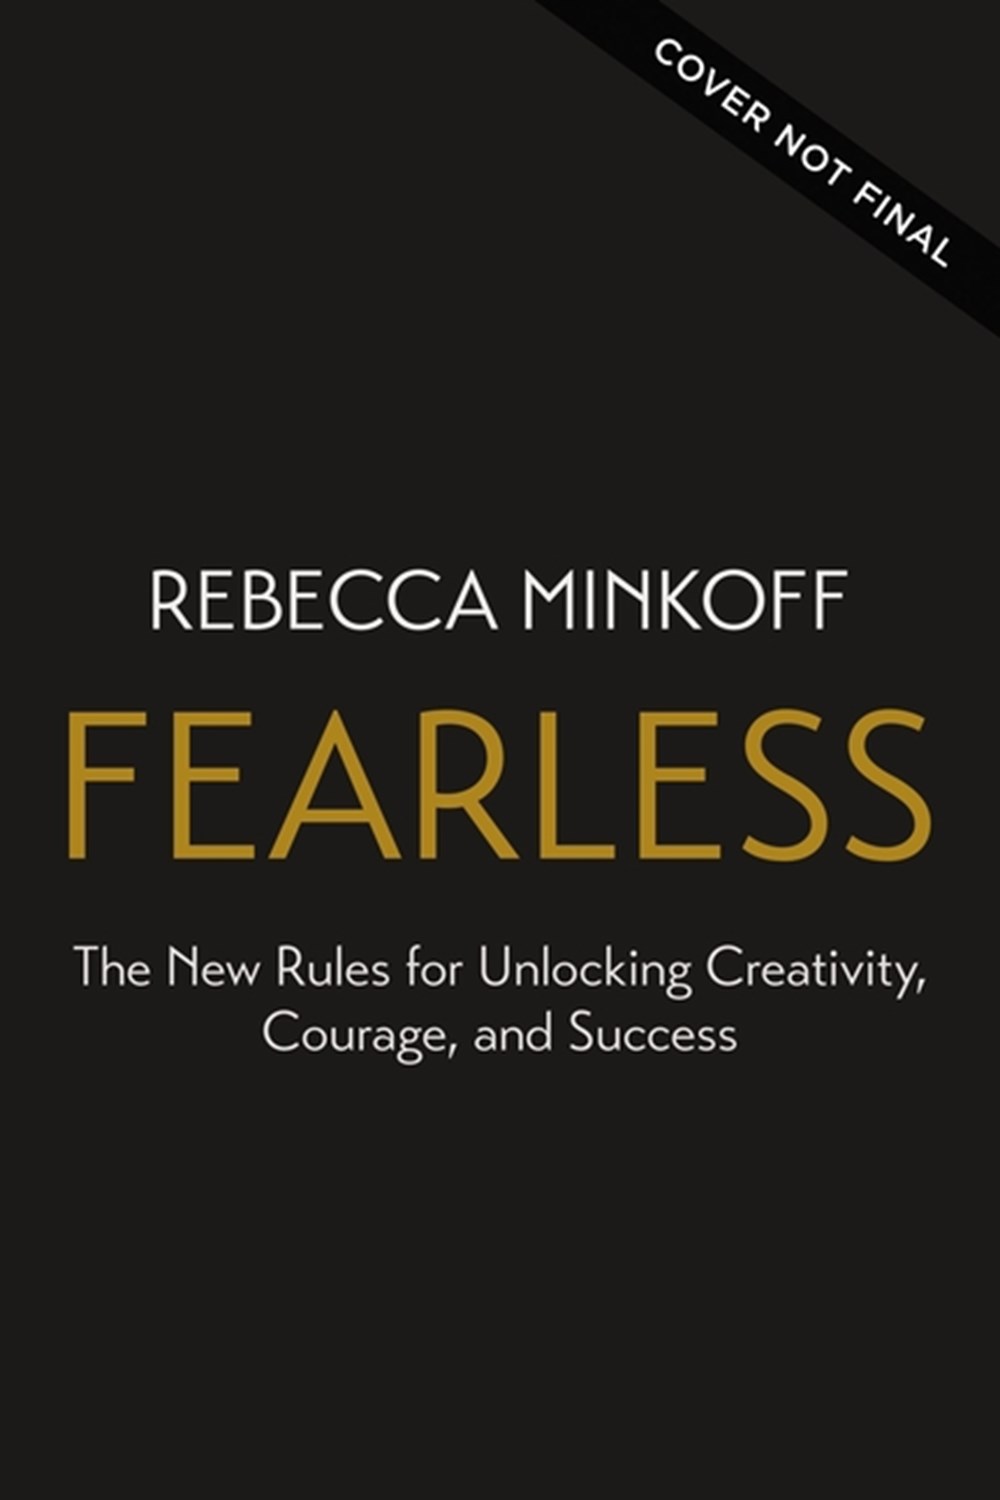 Fearless The New Rules for Unlocking Creativity, Courage, and Success